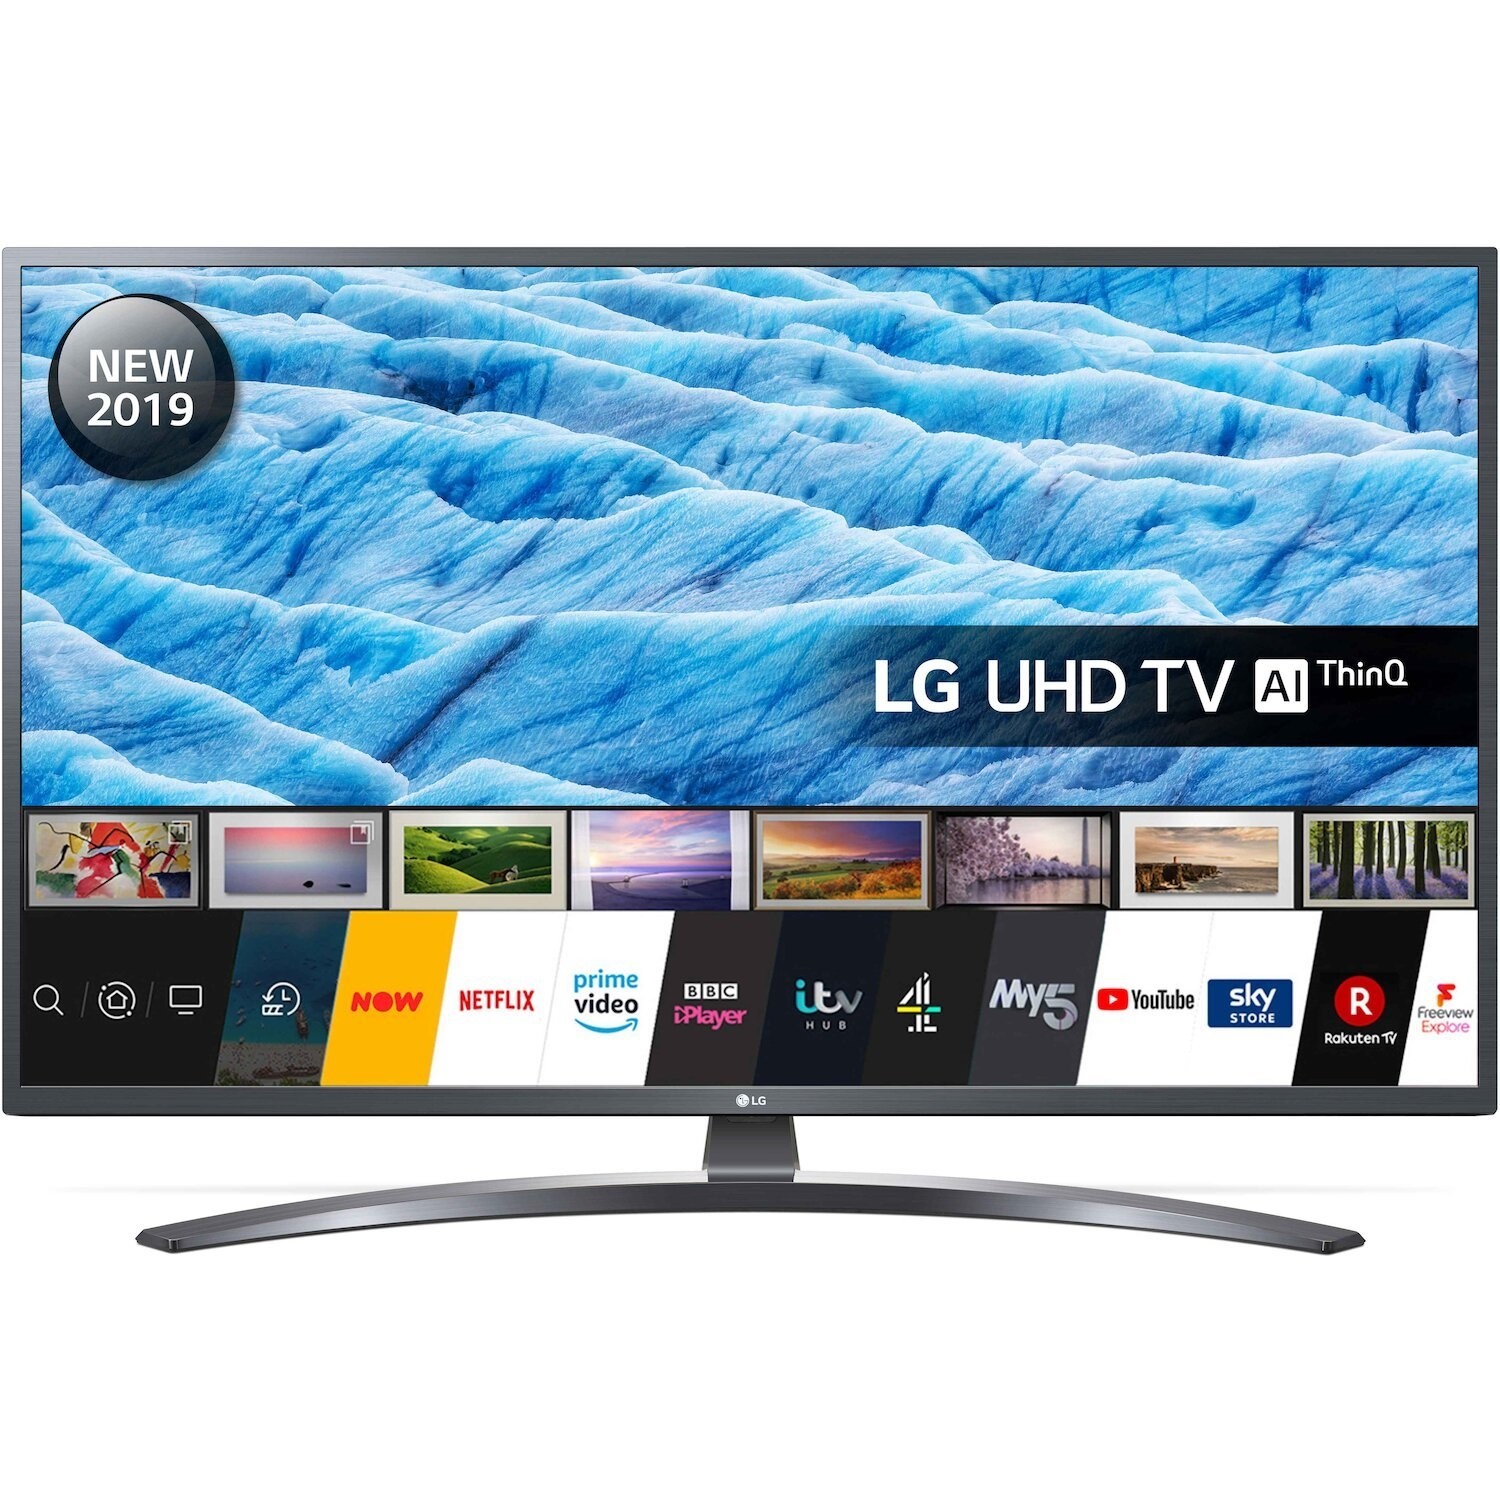 LG 43UM7400PLB (2019) LED HDR 4K Ultra HD Smart TV, 43 with Freeview Play/Freesat HD, Ultra HD Certified, Dark Iron Grey